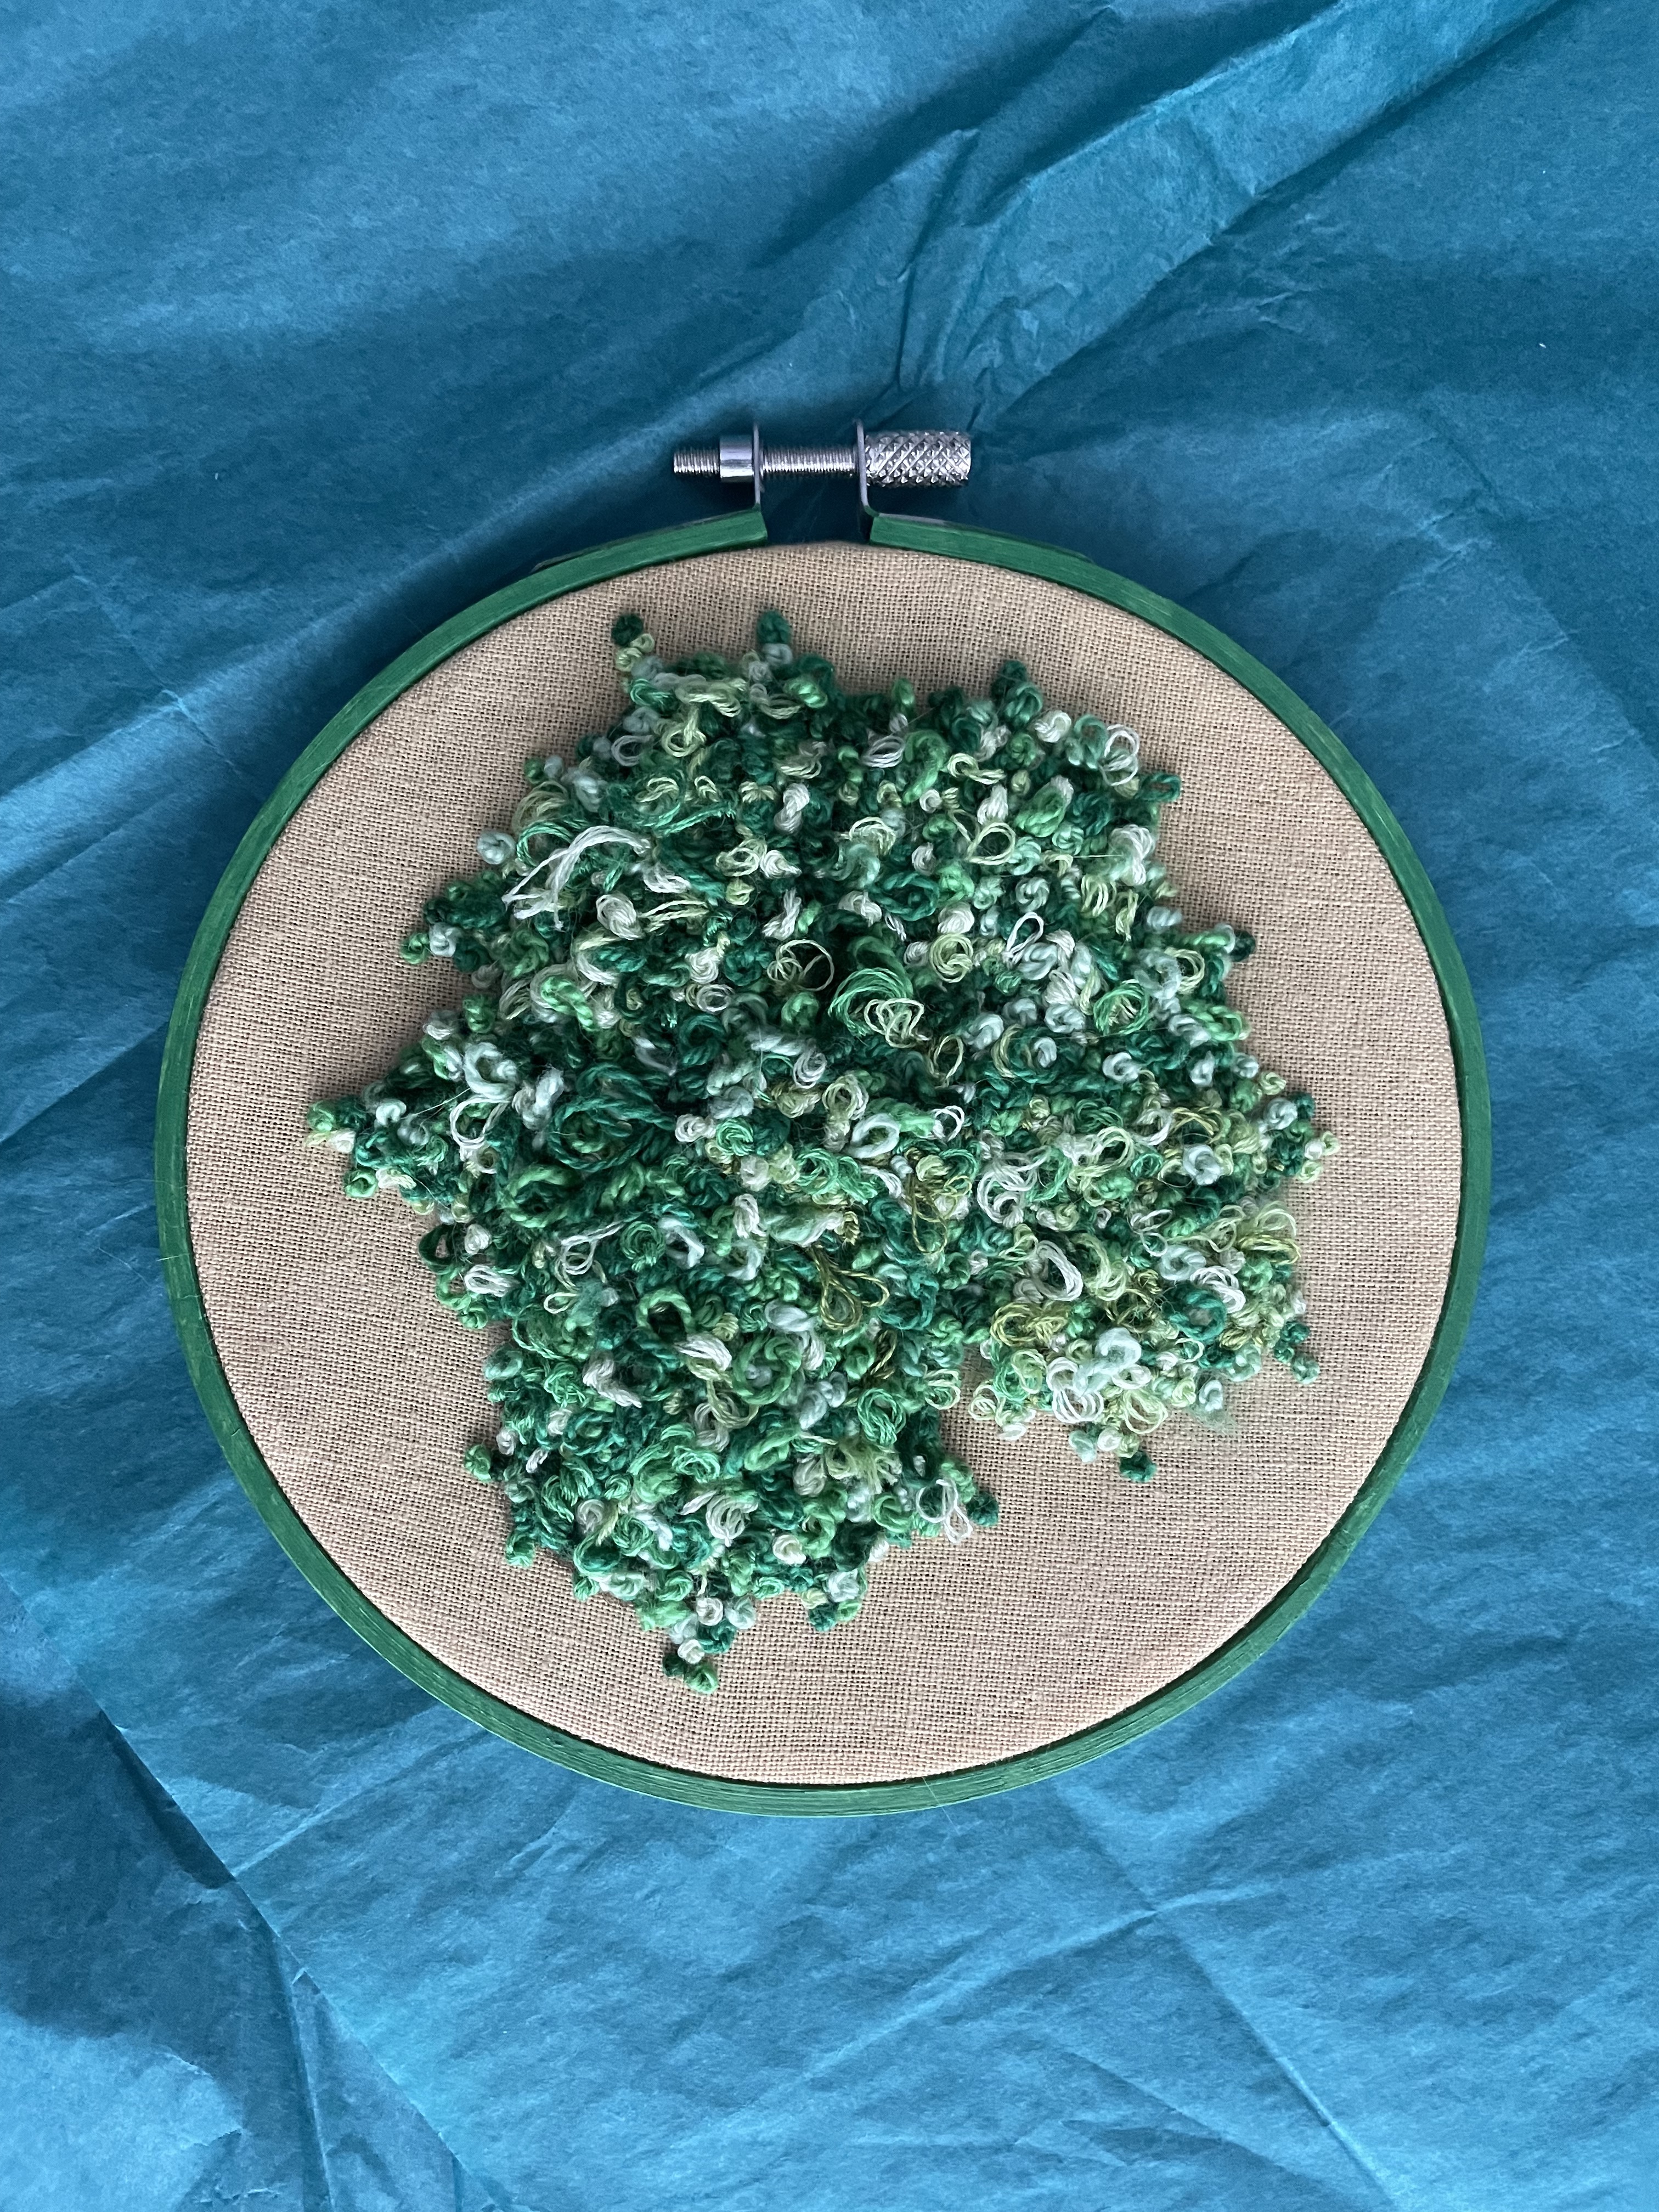 a 5-inch embroidery hoop with green stitched moss on a yellow fabric background